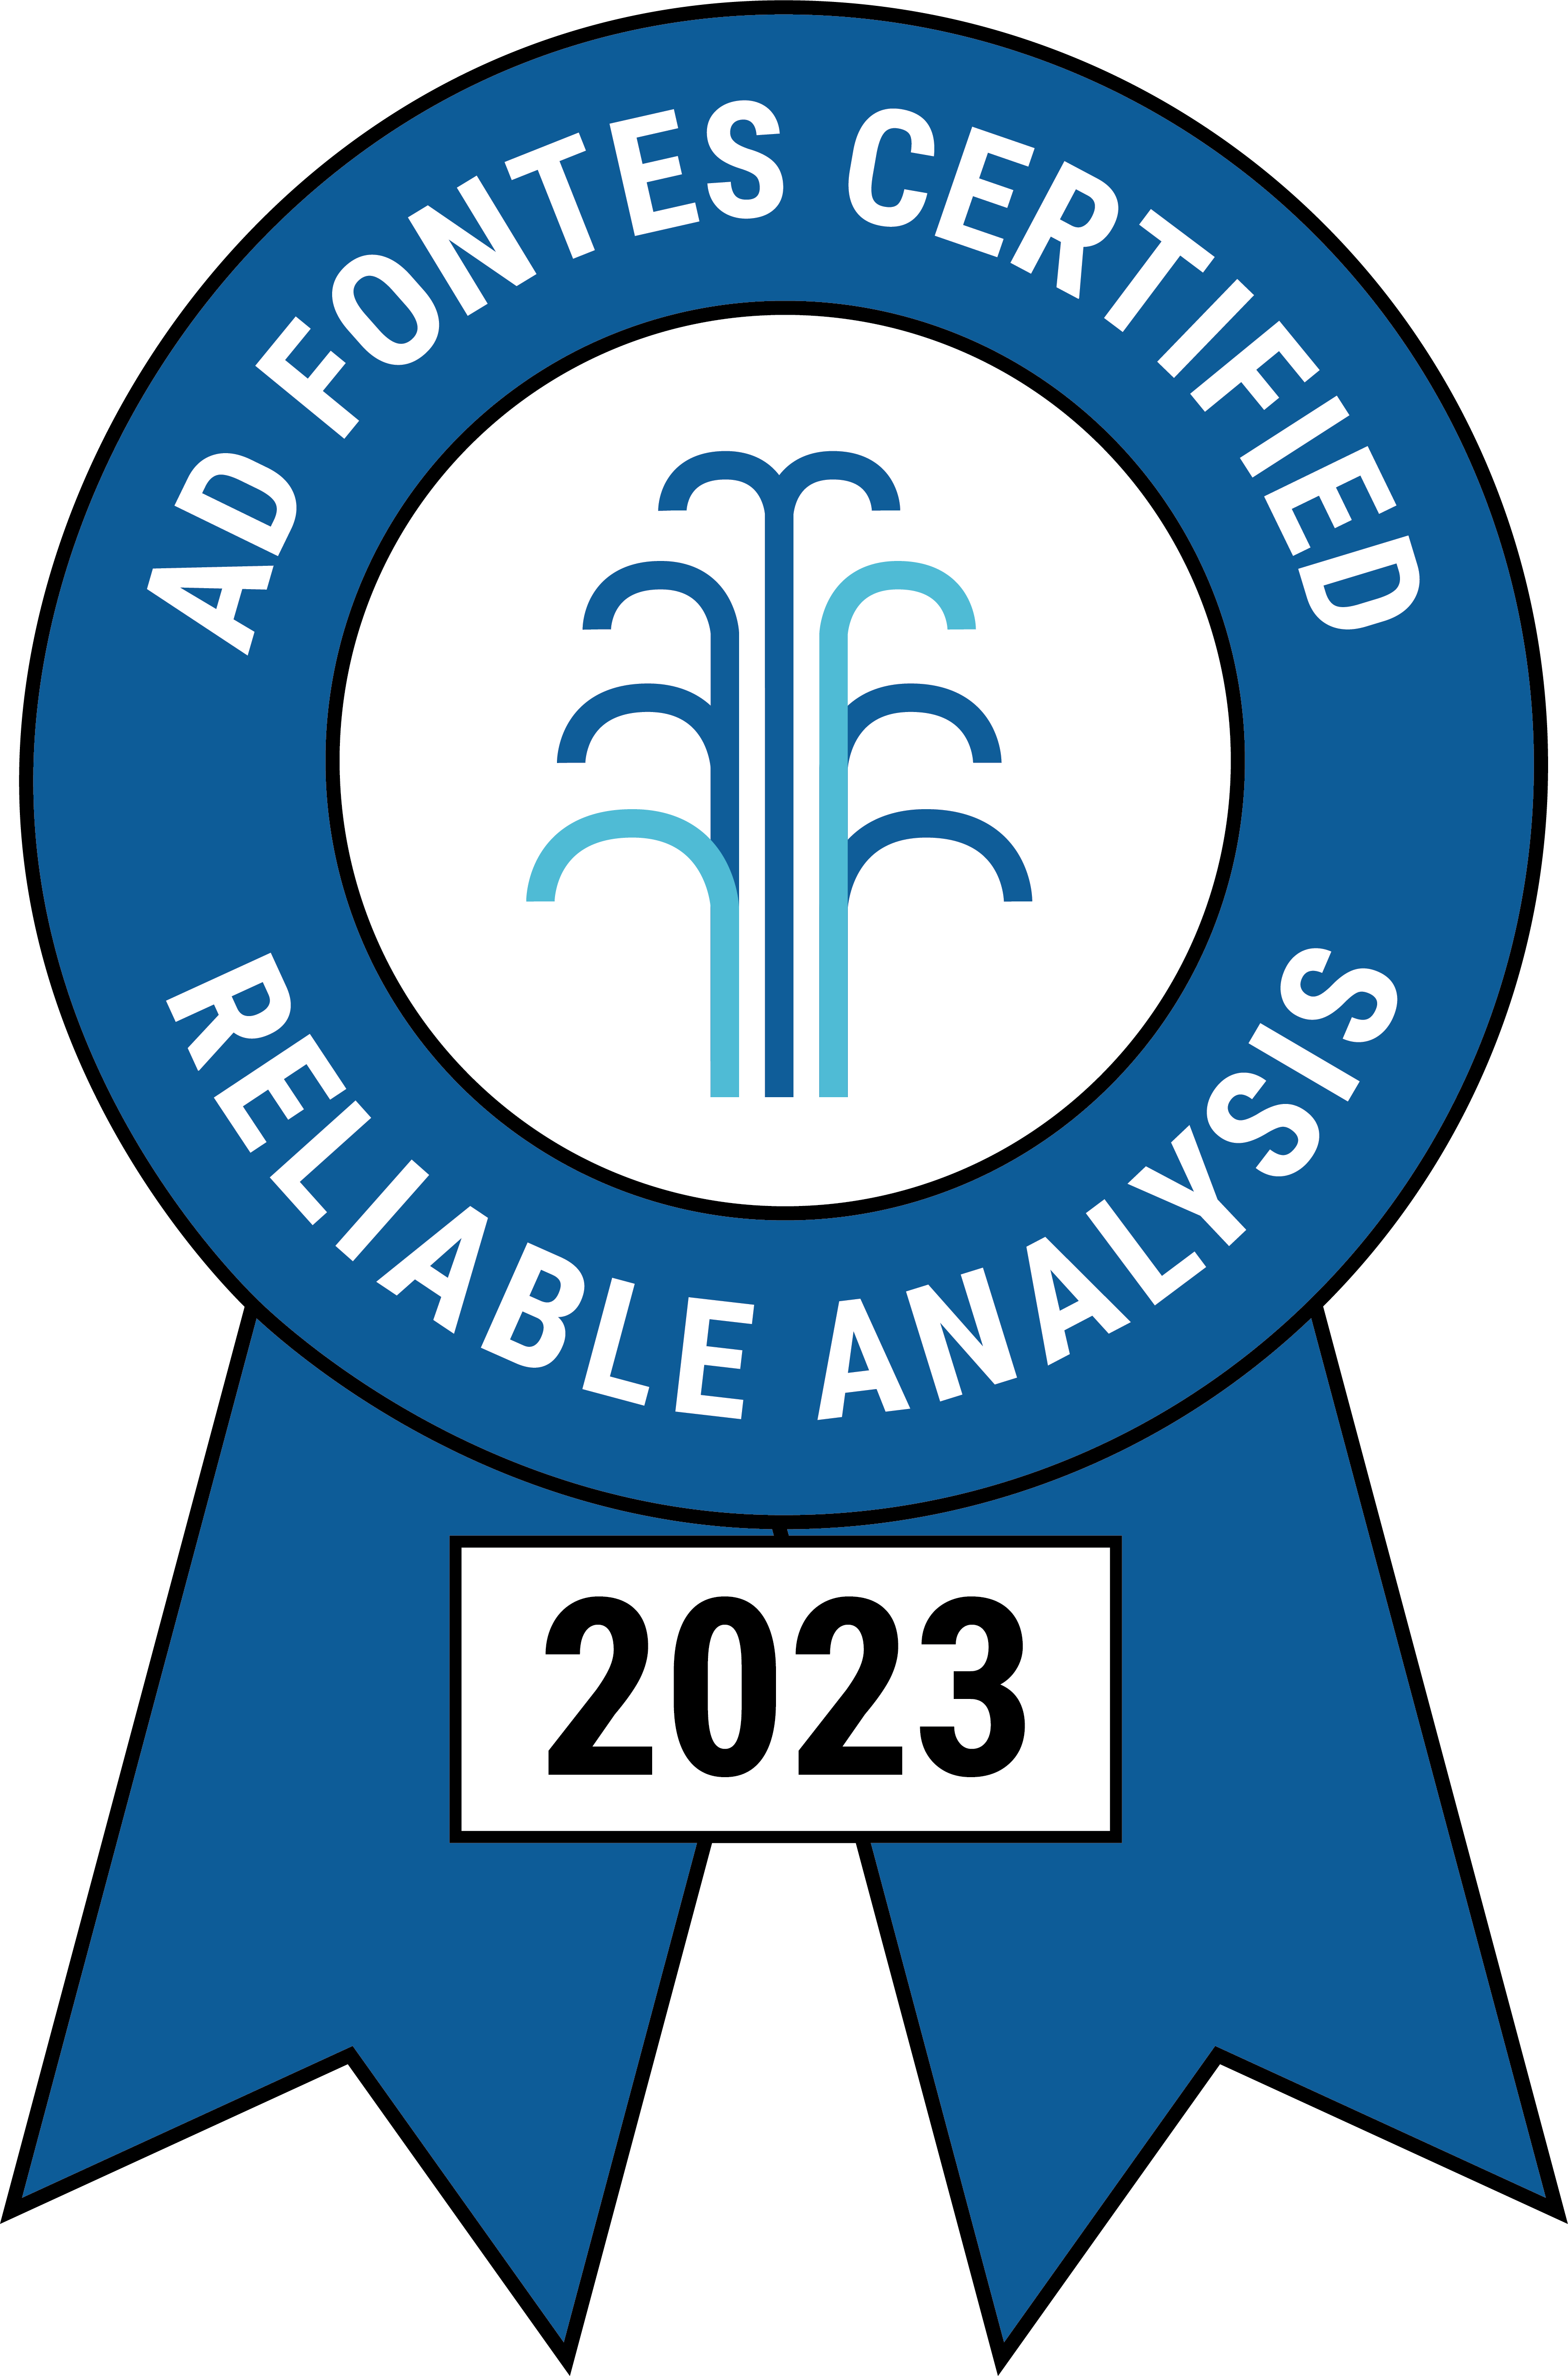 Ad Fontes Certified Reliable Analysis badge